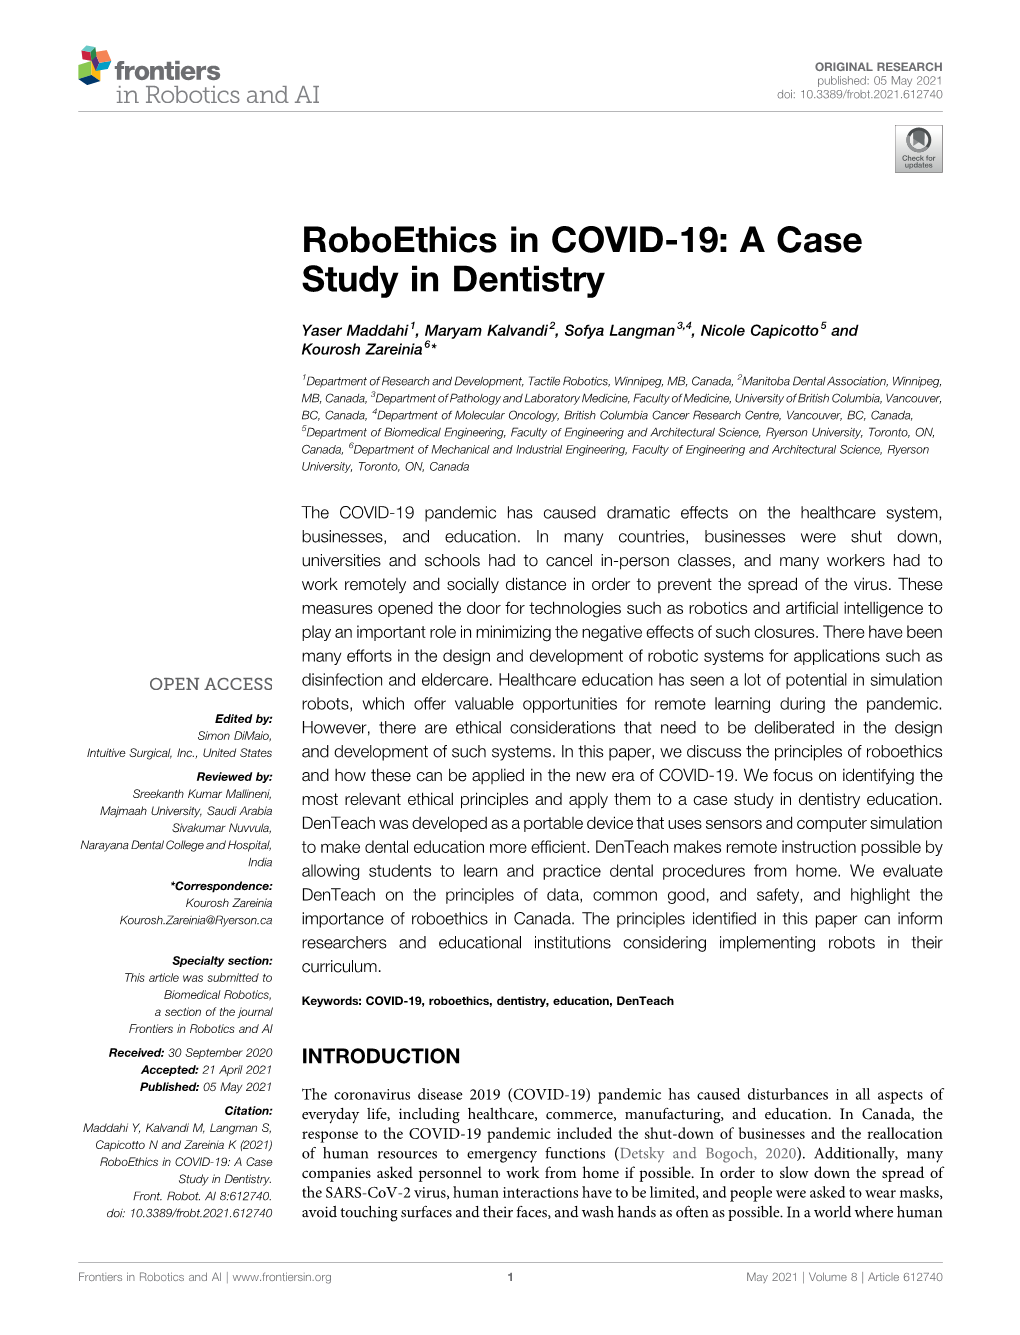 Roboethics in COVID-19: a Case Study in Dentistry